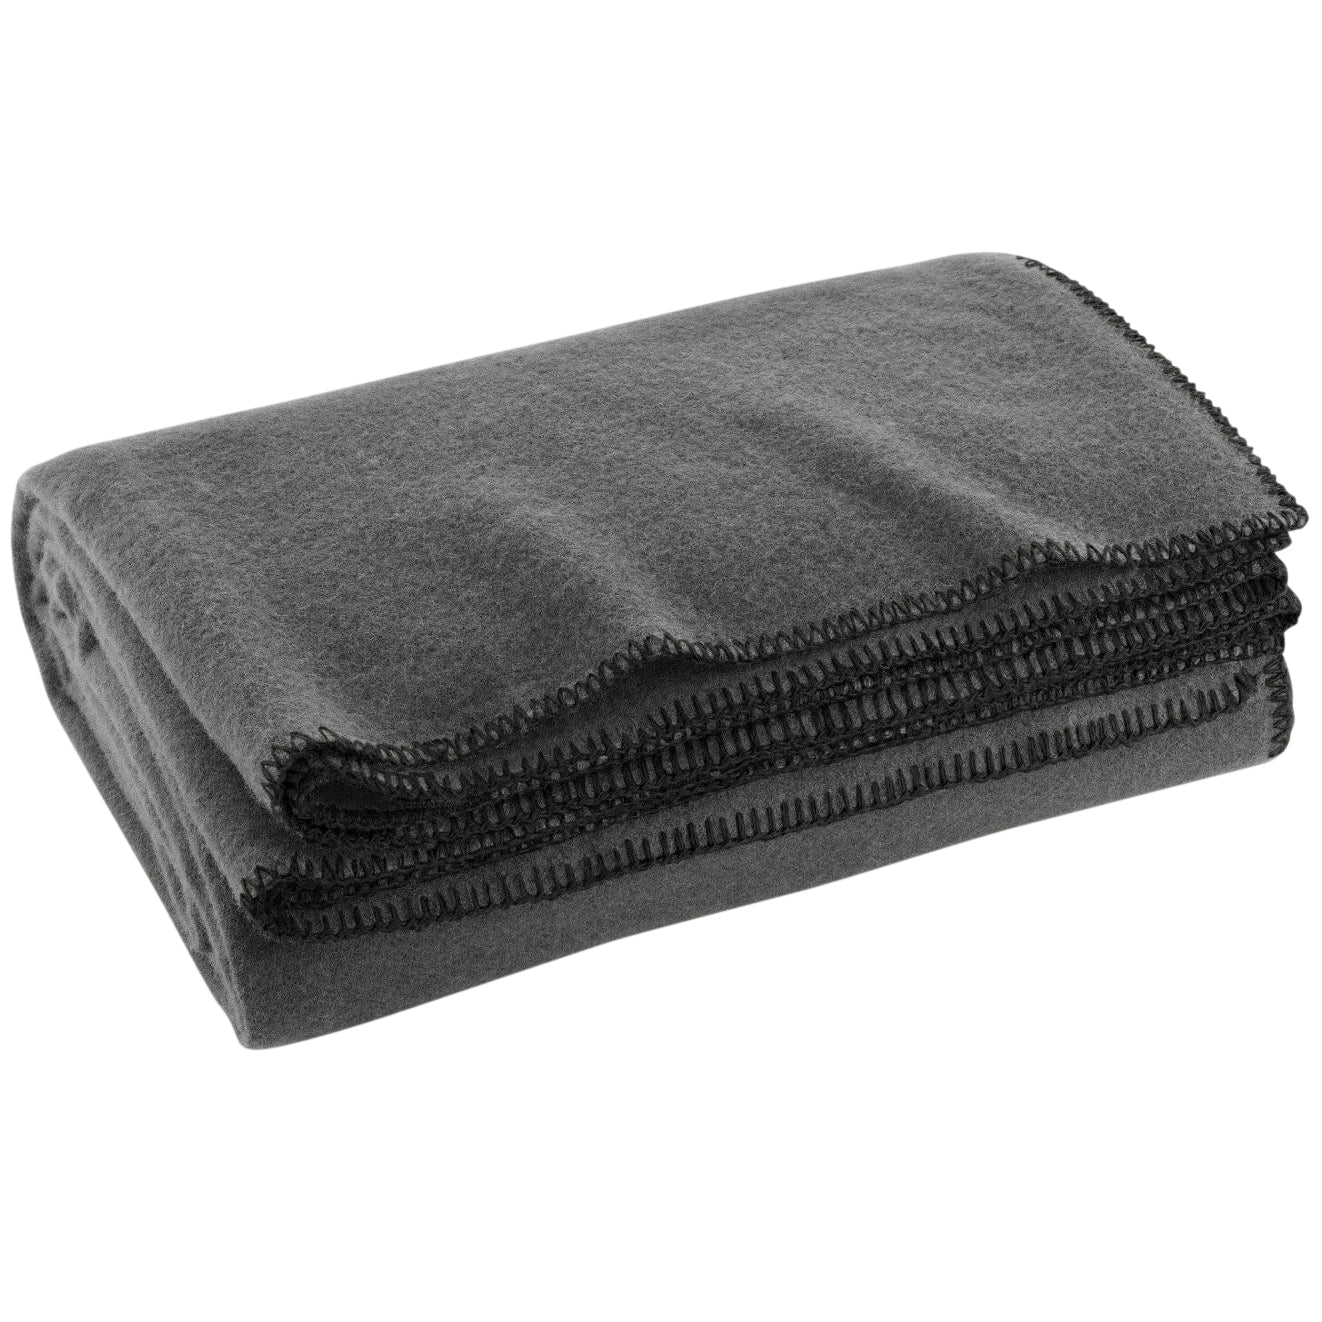 McGuire Gear Camping Survival Military Wool Blanket – McGuire Army Navy